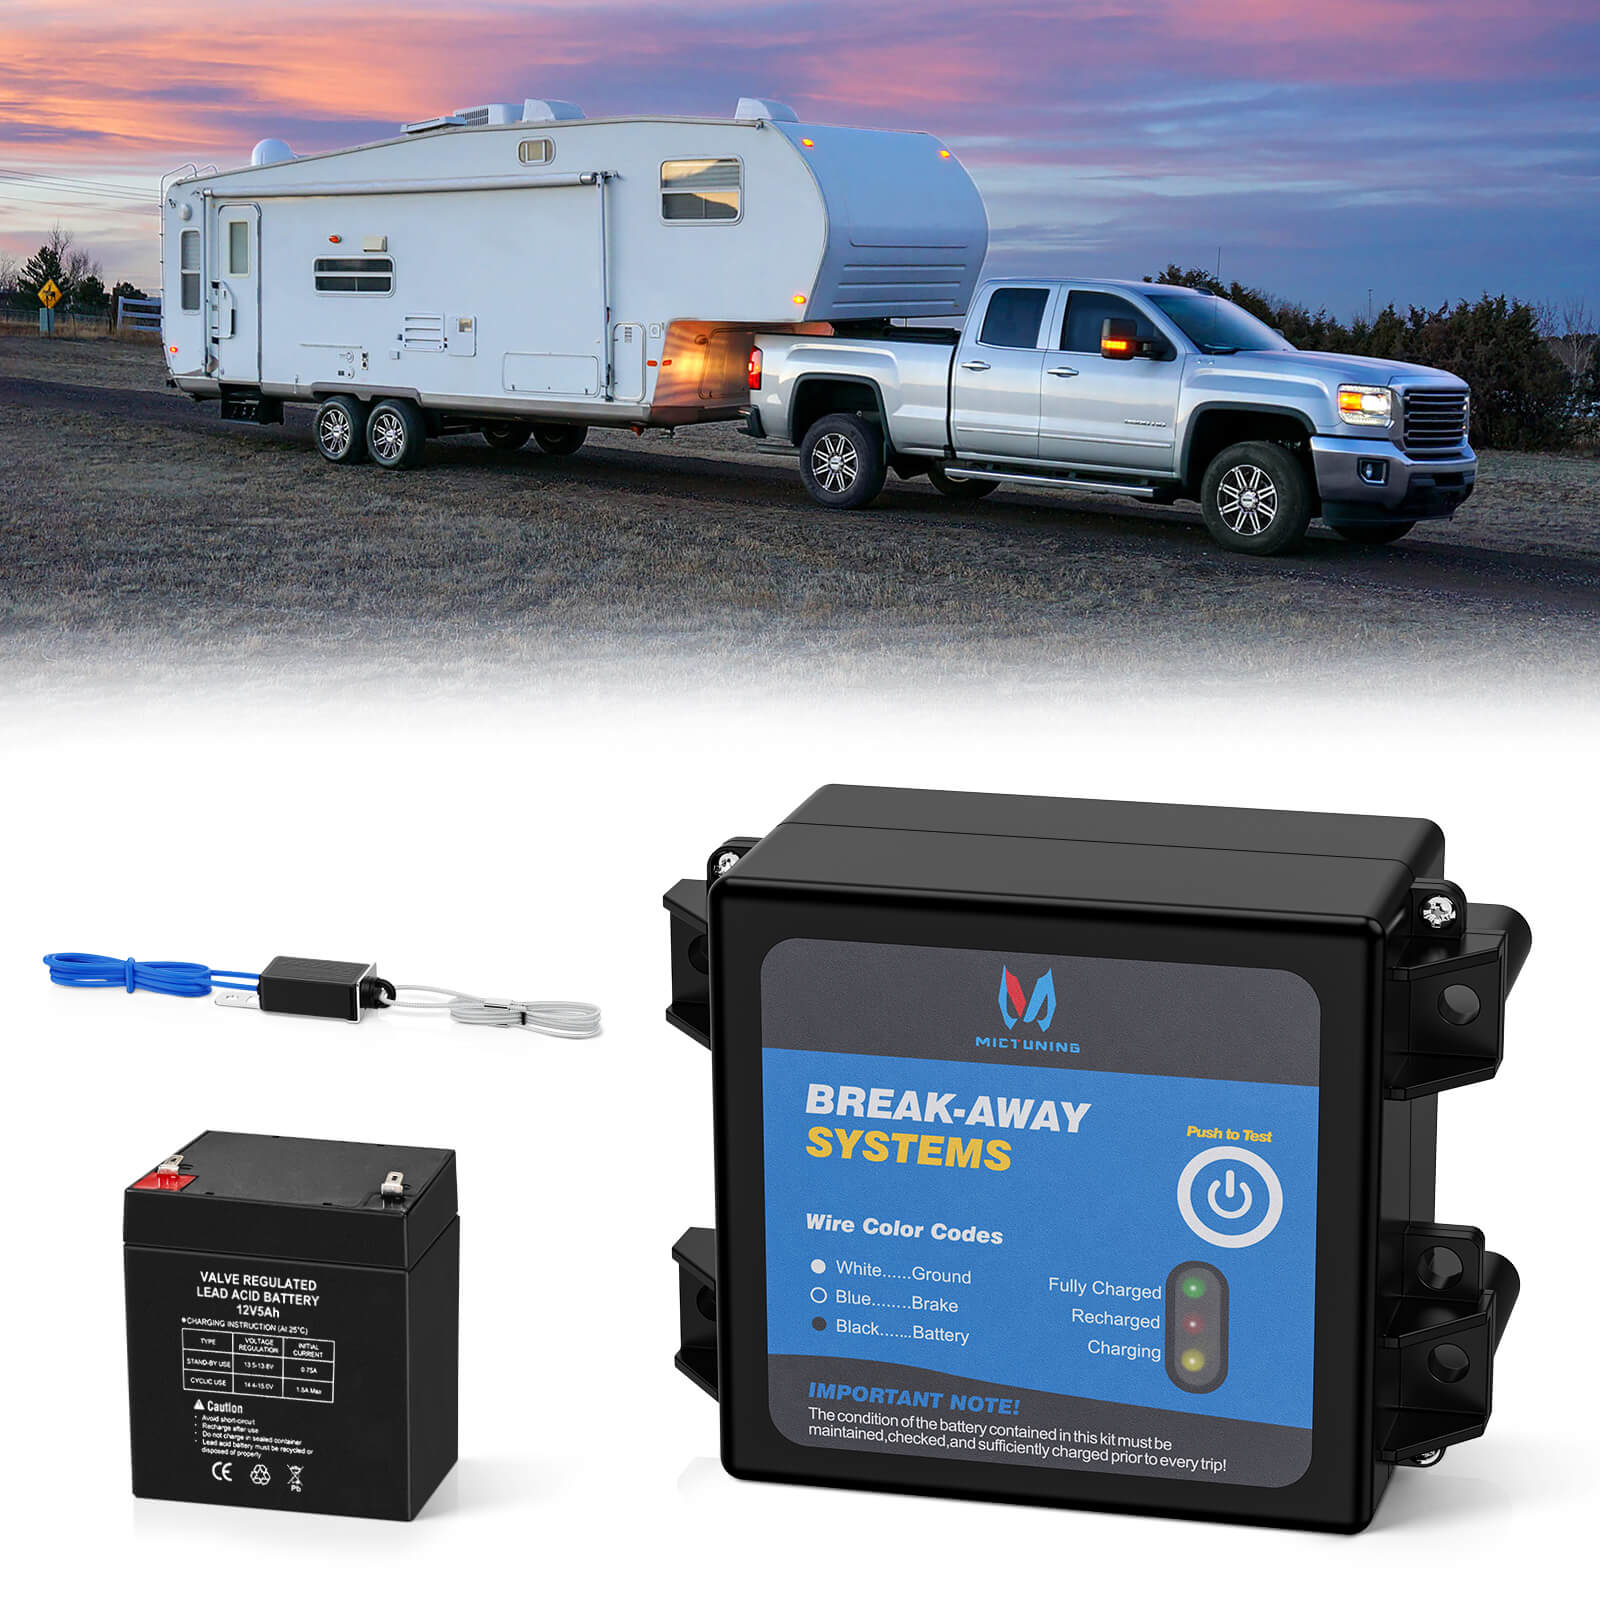 Trailer Brakes Breakaway Kit with Charger, LED Indicator, Switch, 12V 5AH Built-in Battery for Towing Trailer Caravan